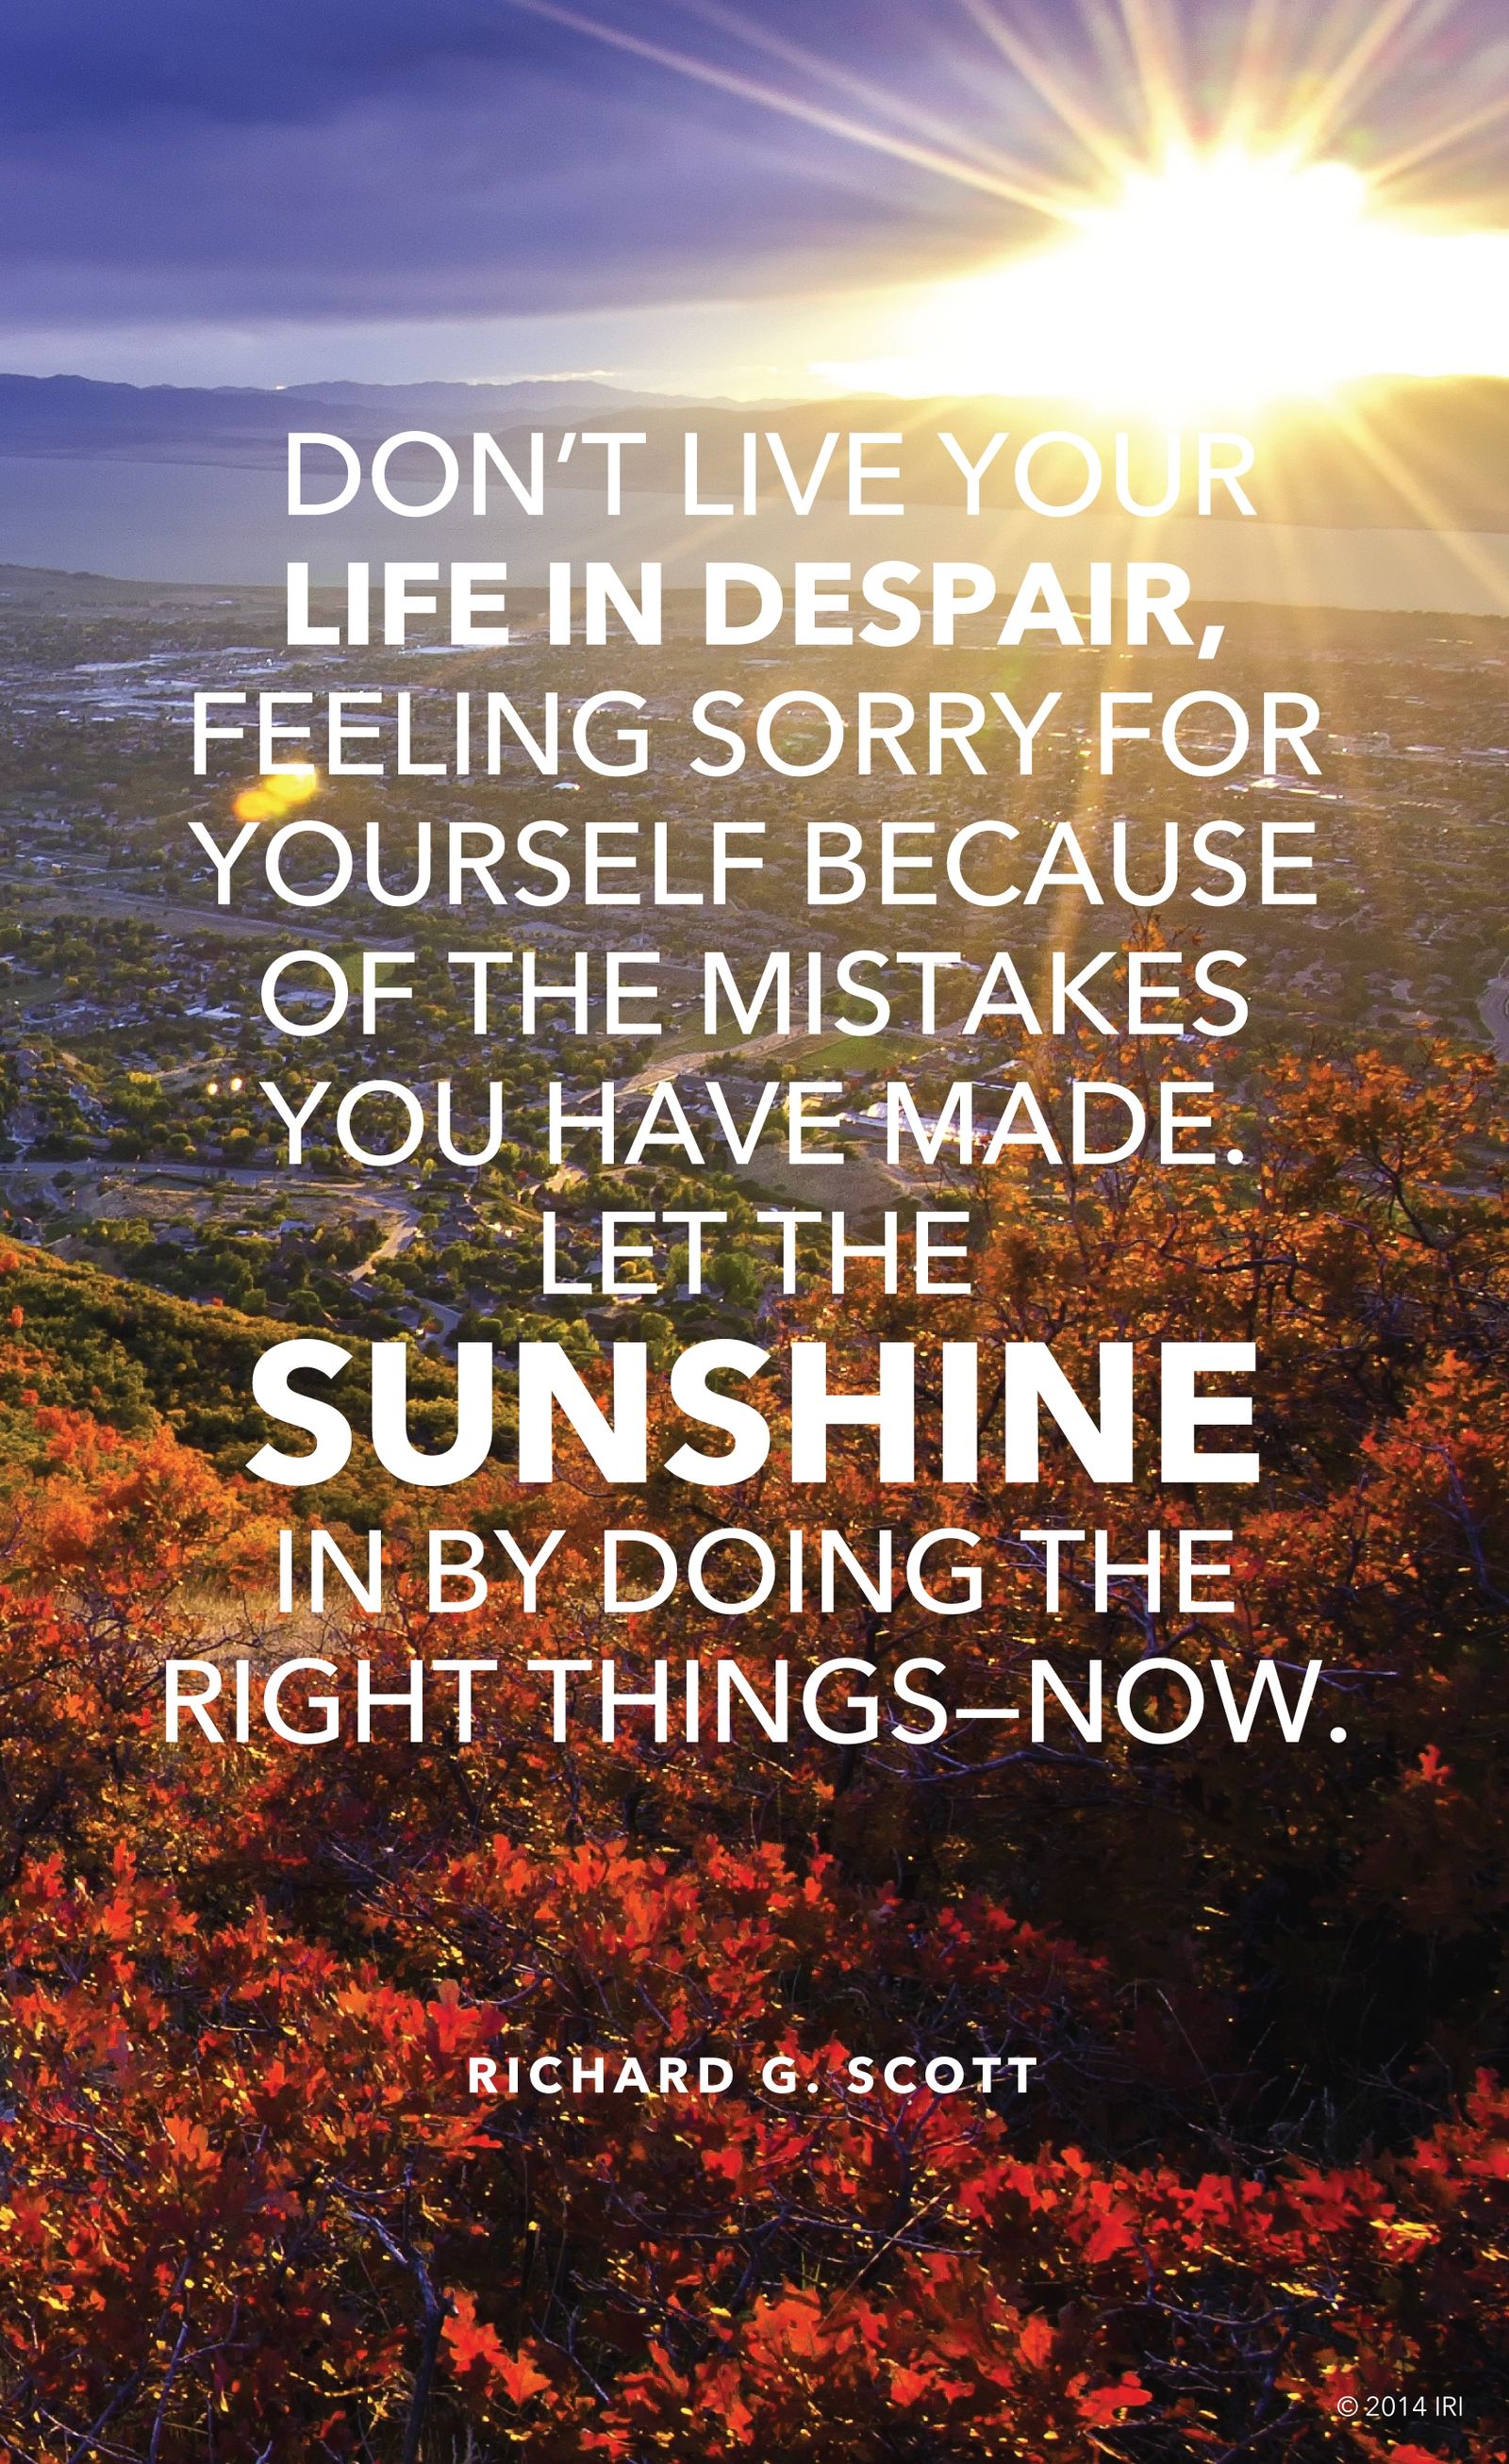 “Don't live your life in despair, feeling sorry for yourself because of the mistakes you have made. Let the sunshine in by doing the right things—now.”—Elder Richard G. Scott, “Finding the Way Back”